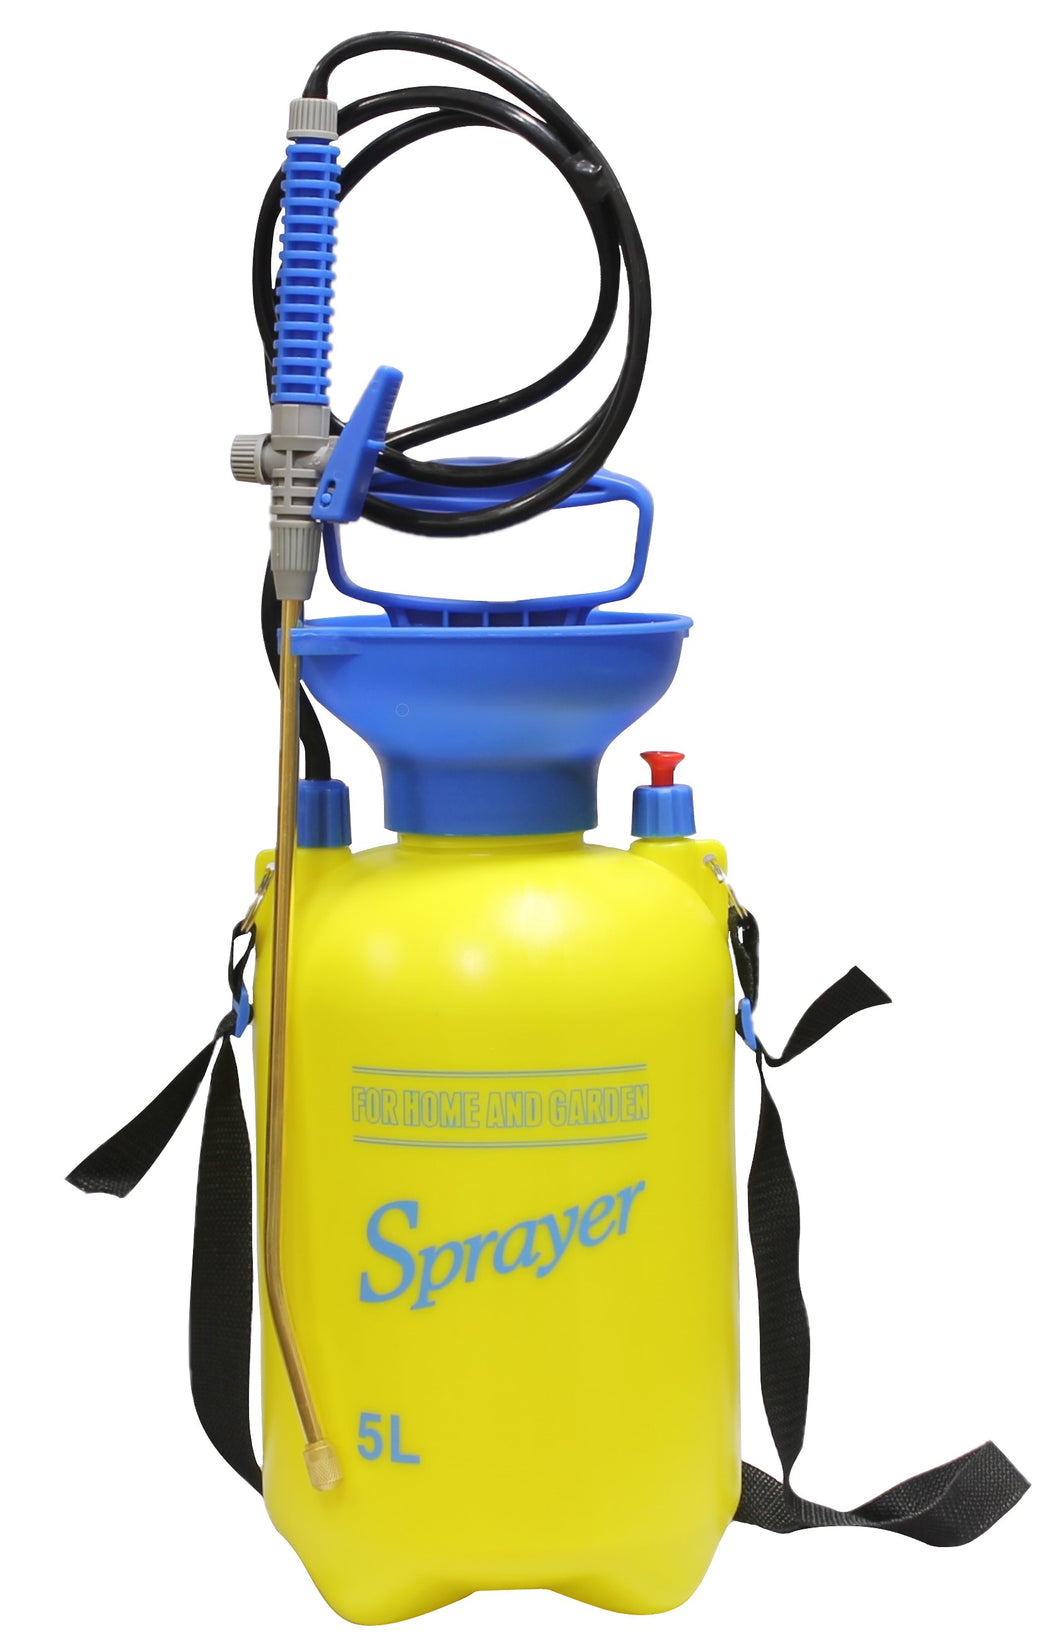 CHS Yellow 5 Litre High pressure portable manual pump shoulder strap insecticide/pesticide sprayer with brass lance wand